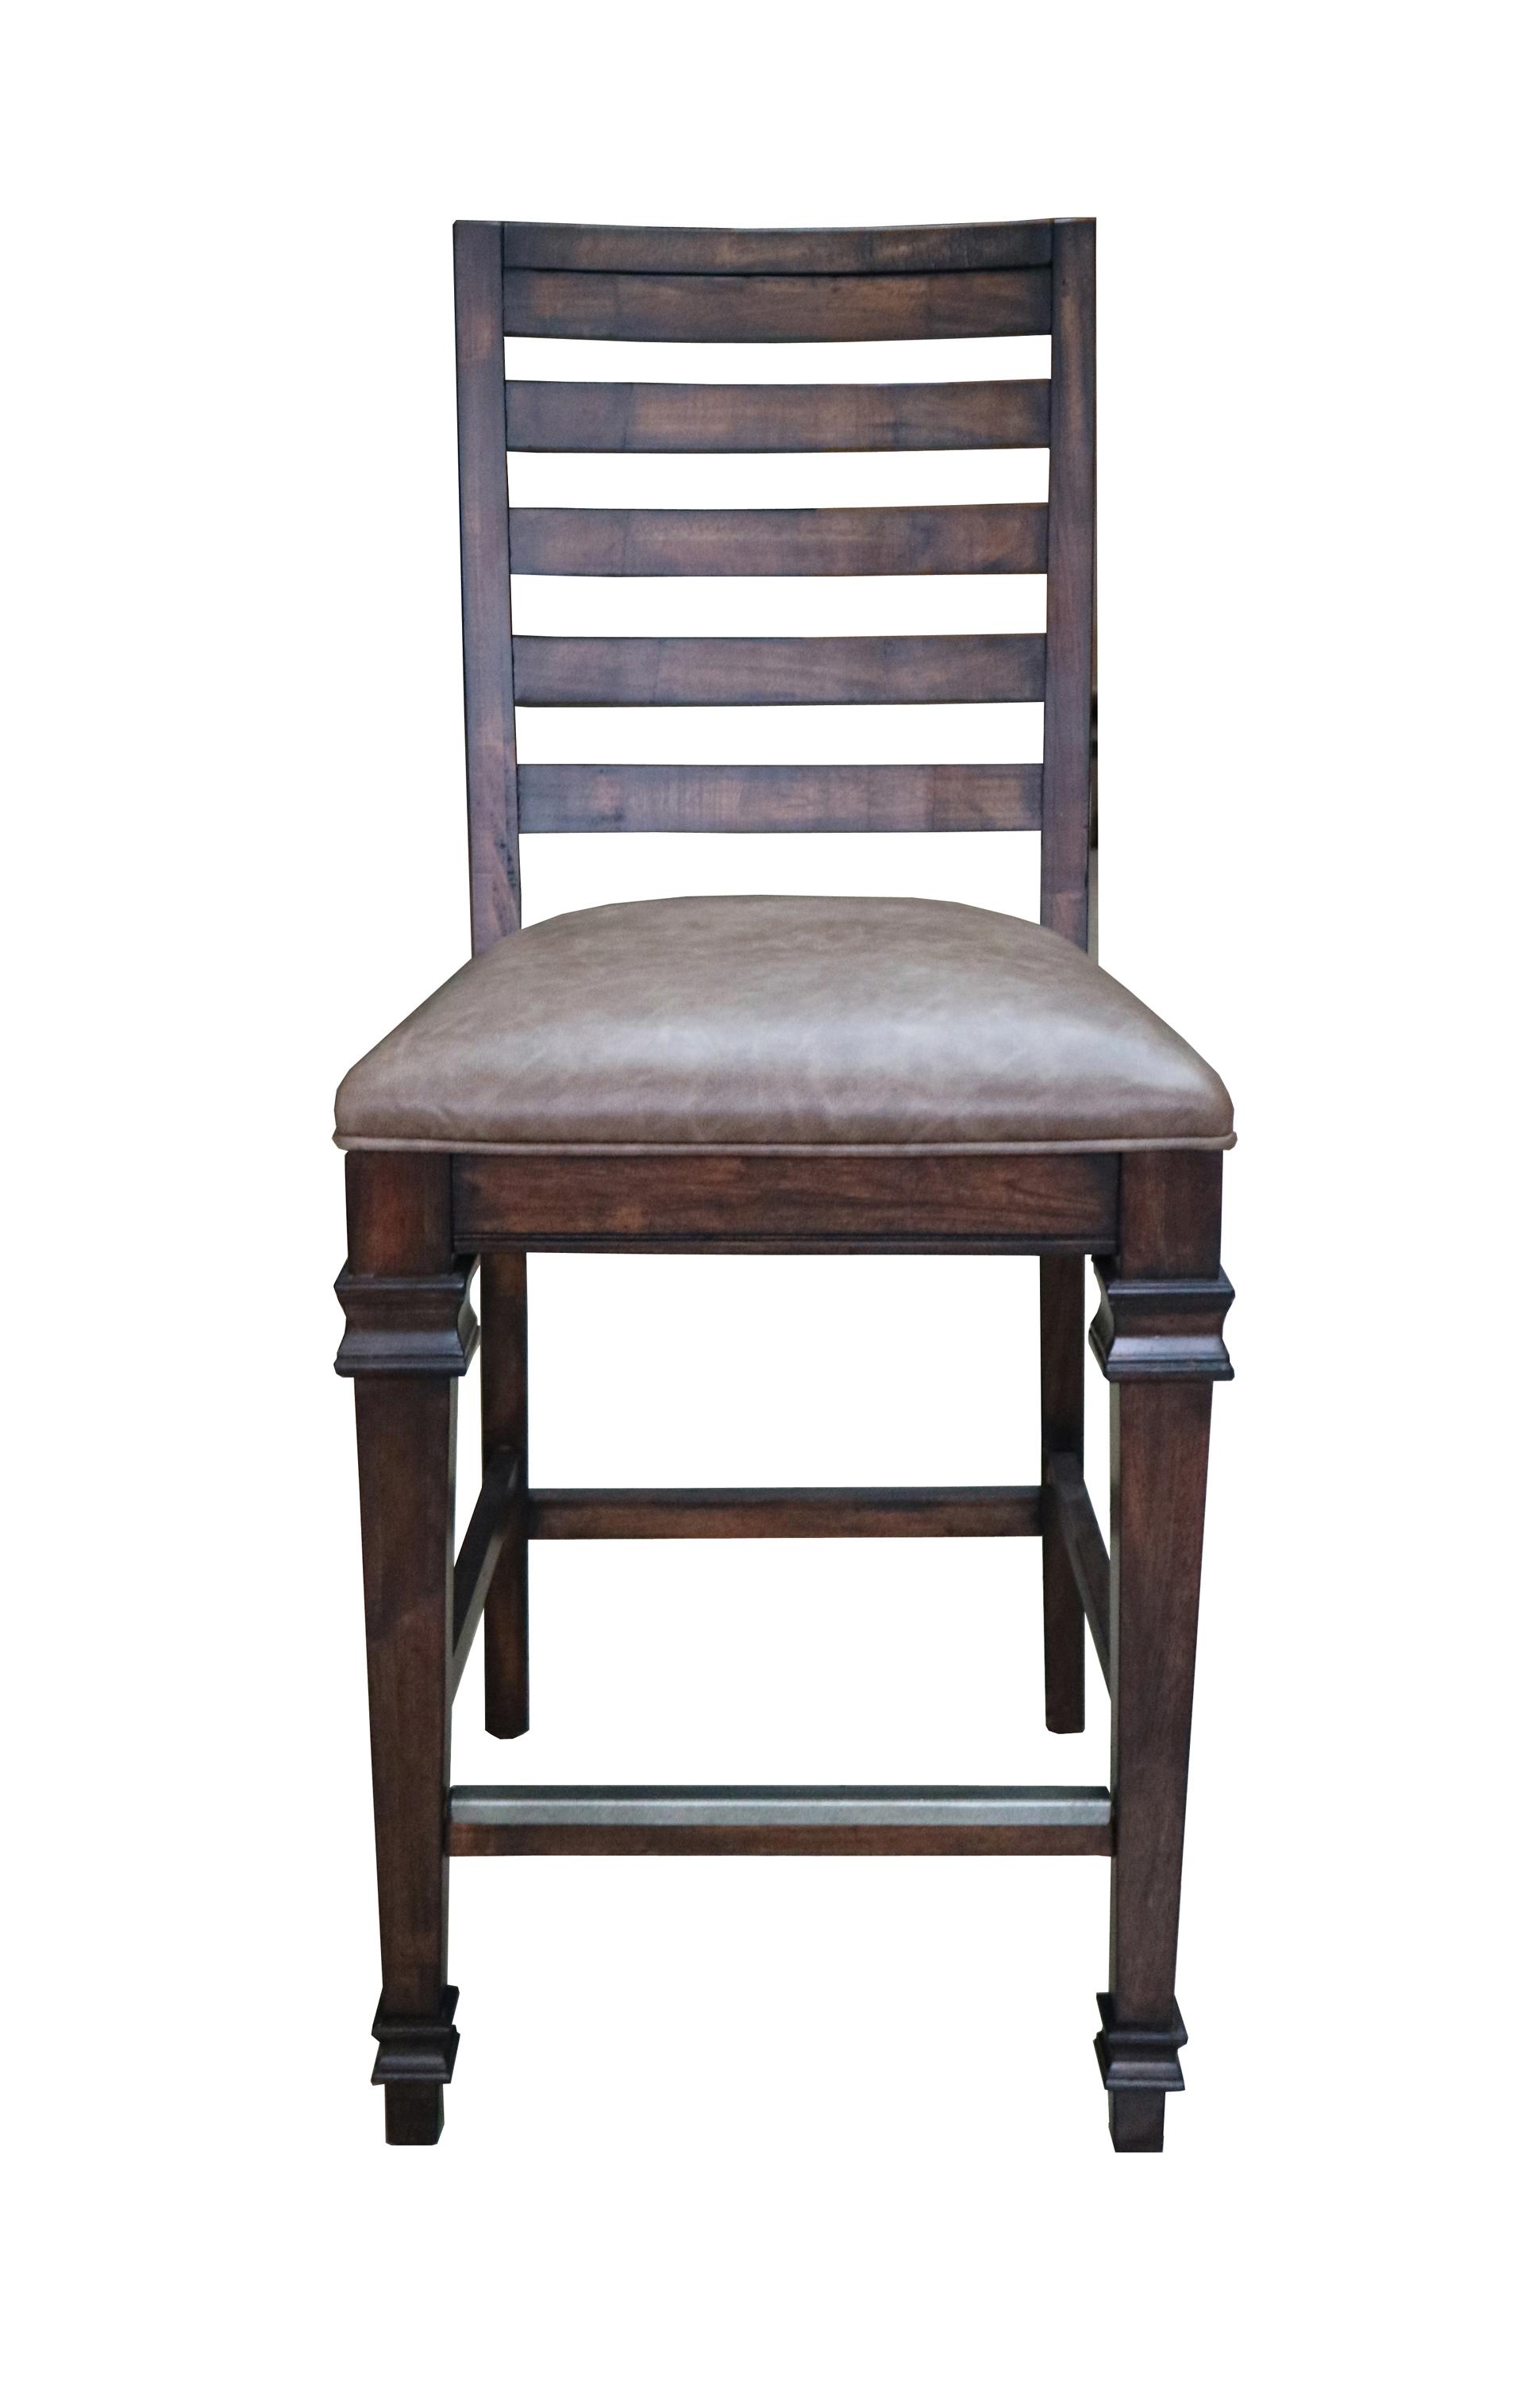 Traditional Counter Height Chairs Set 192749 Delphine 192749 in Brown Leatherette